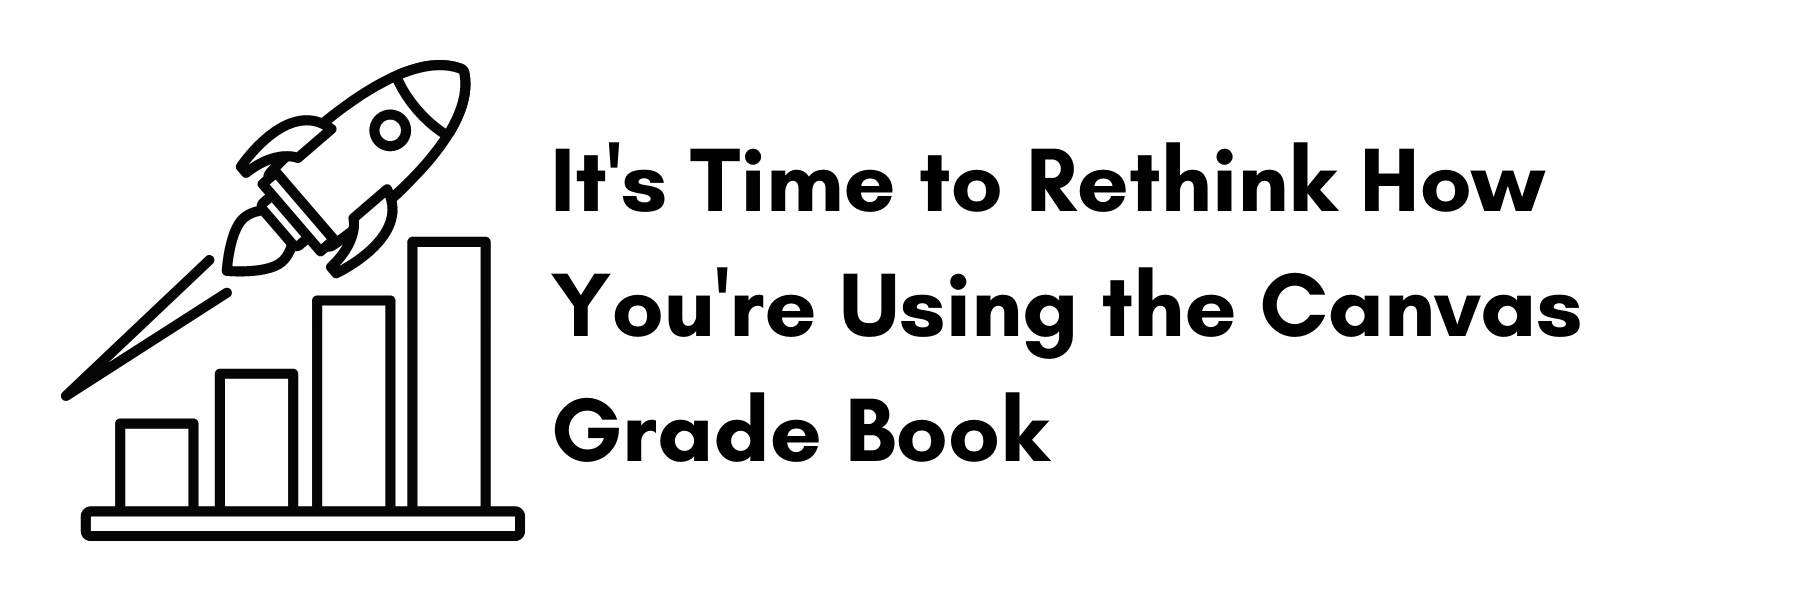  It’s Time to Rethink How You’re Using the Canvas Grade Book